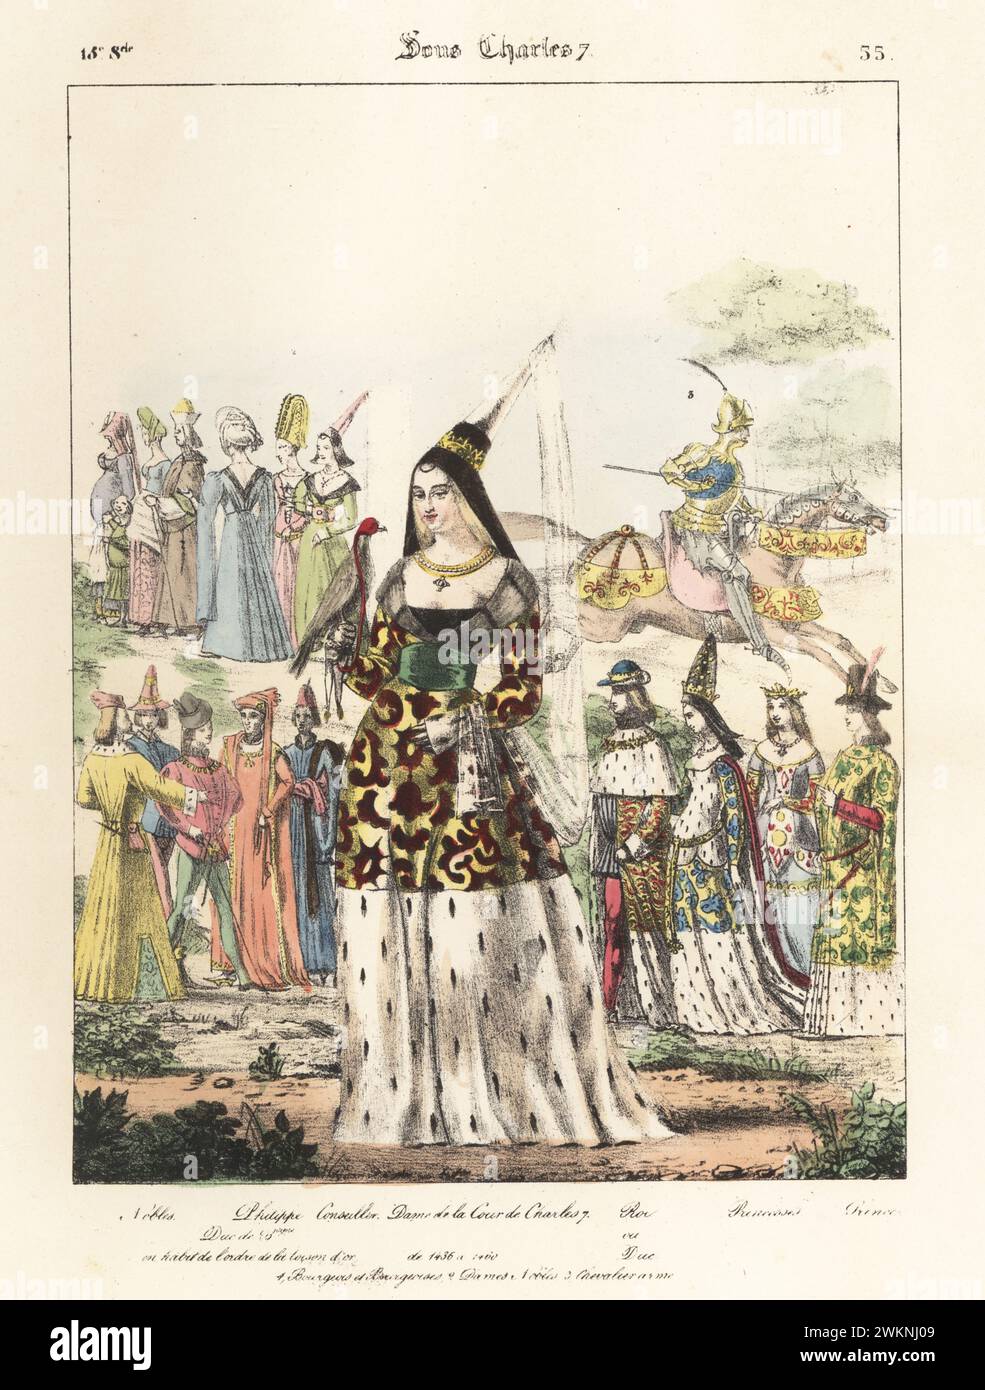 Lady at the court of King Charles VII in hennin, embroidered robe, ermine skirts, with hawk in cap, Philip the Good of Burgundy and other royals, nobles, knights, etc. Nobles, Philippe Duc de Bourgogne, Conseiller, Dame de la Cour de Charles 7, Roi ou Duc, Princesses, Prince. Sous Charles 7. Handcoloured lithograph by Godard after an illustration by Charles Auguste Herbé from his own Costumes Francais, Civils, Militaires et Religieux, French Costumes, Civil, Military and Religious, Maison Martinet, Paris, 1837. Stock Photo